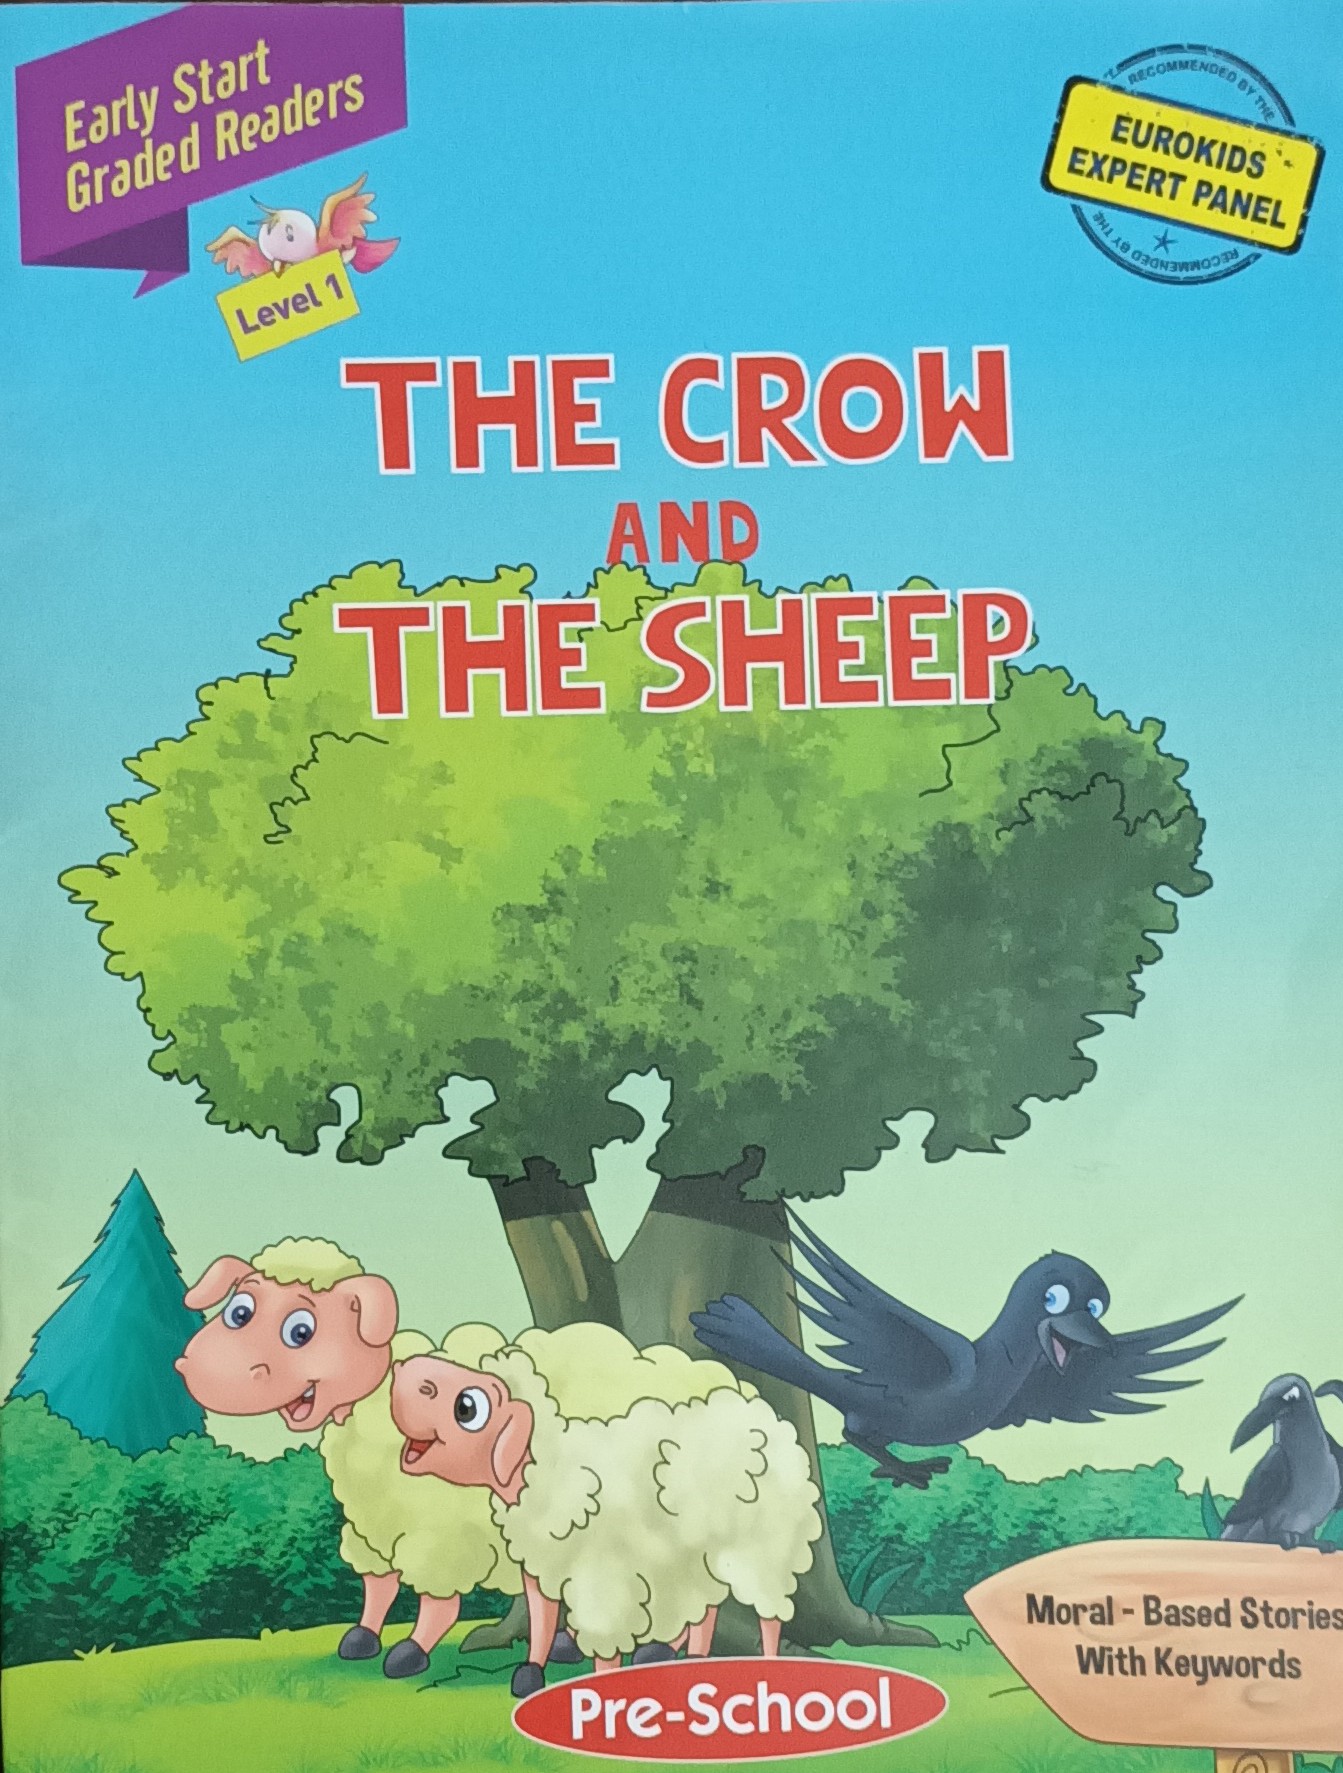 The crow and the sheep